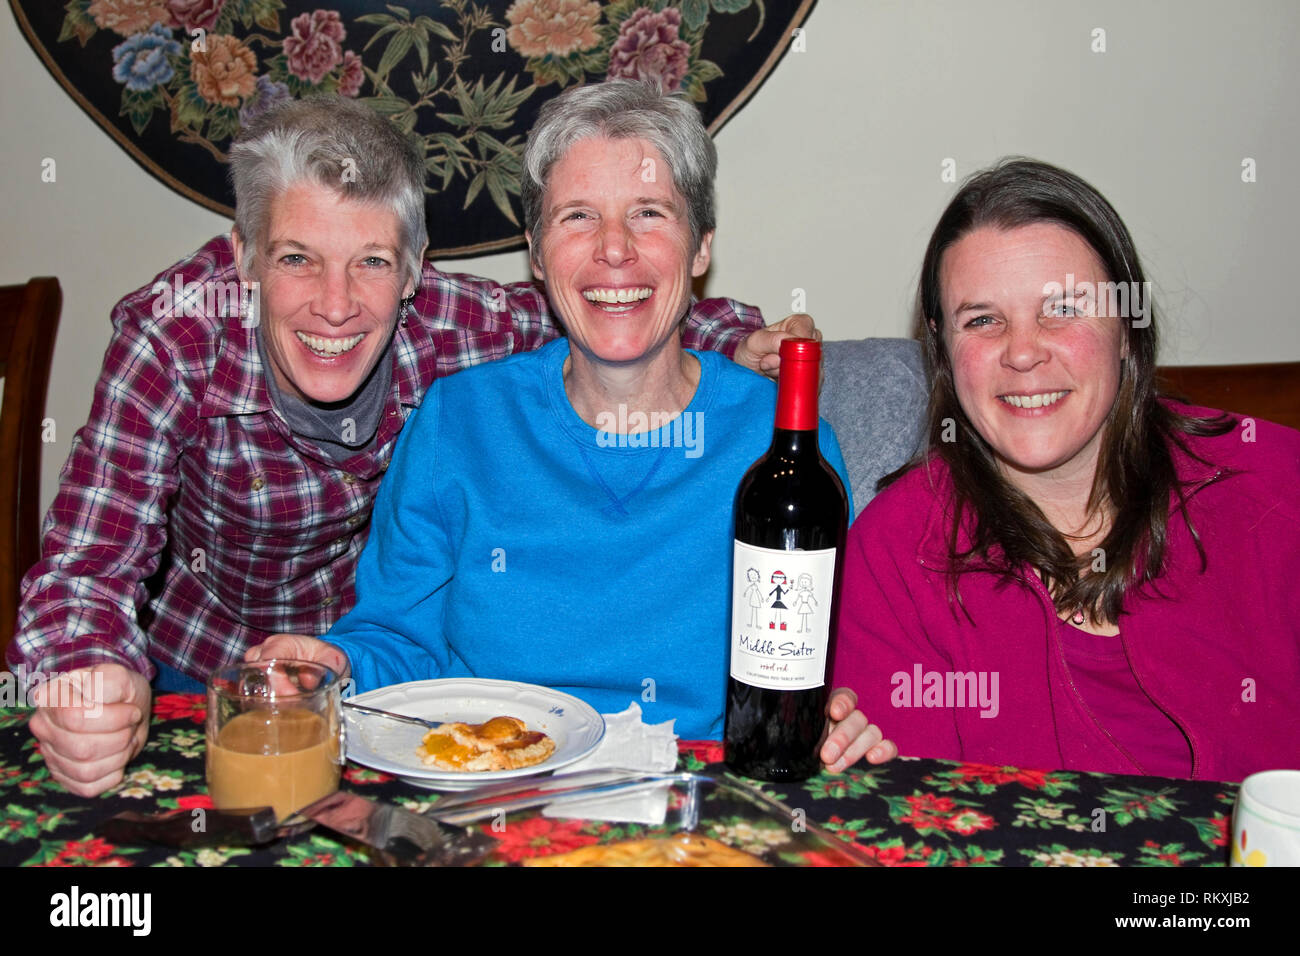 3 adult women, sisters, 40s, dinner table, wine bottle, smiling, happy, family resemblance; horizontal; MR Stock Photo